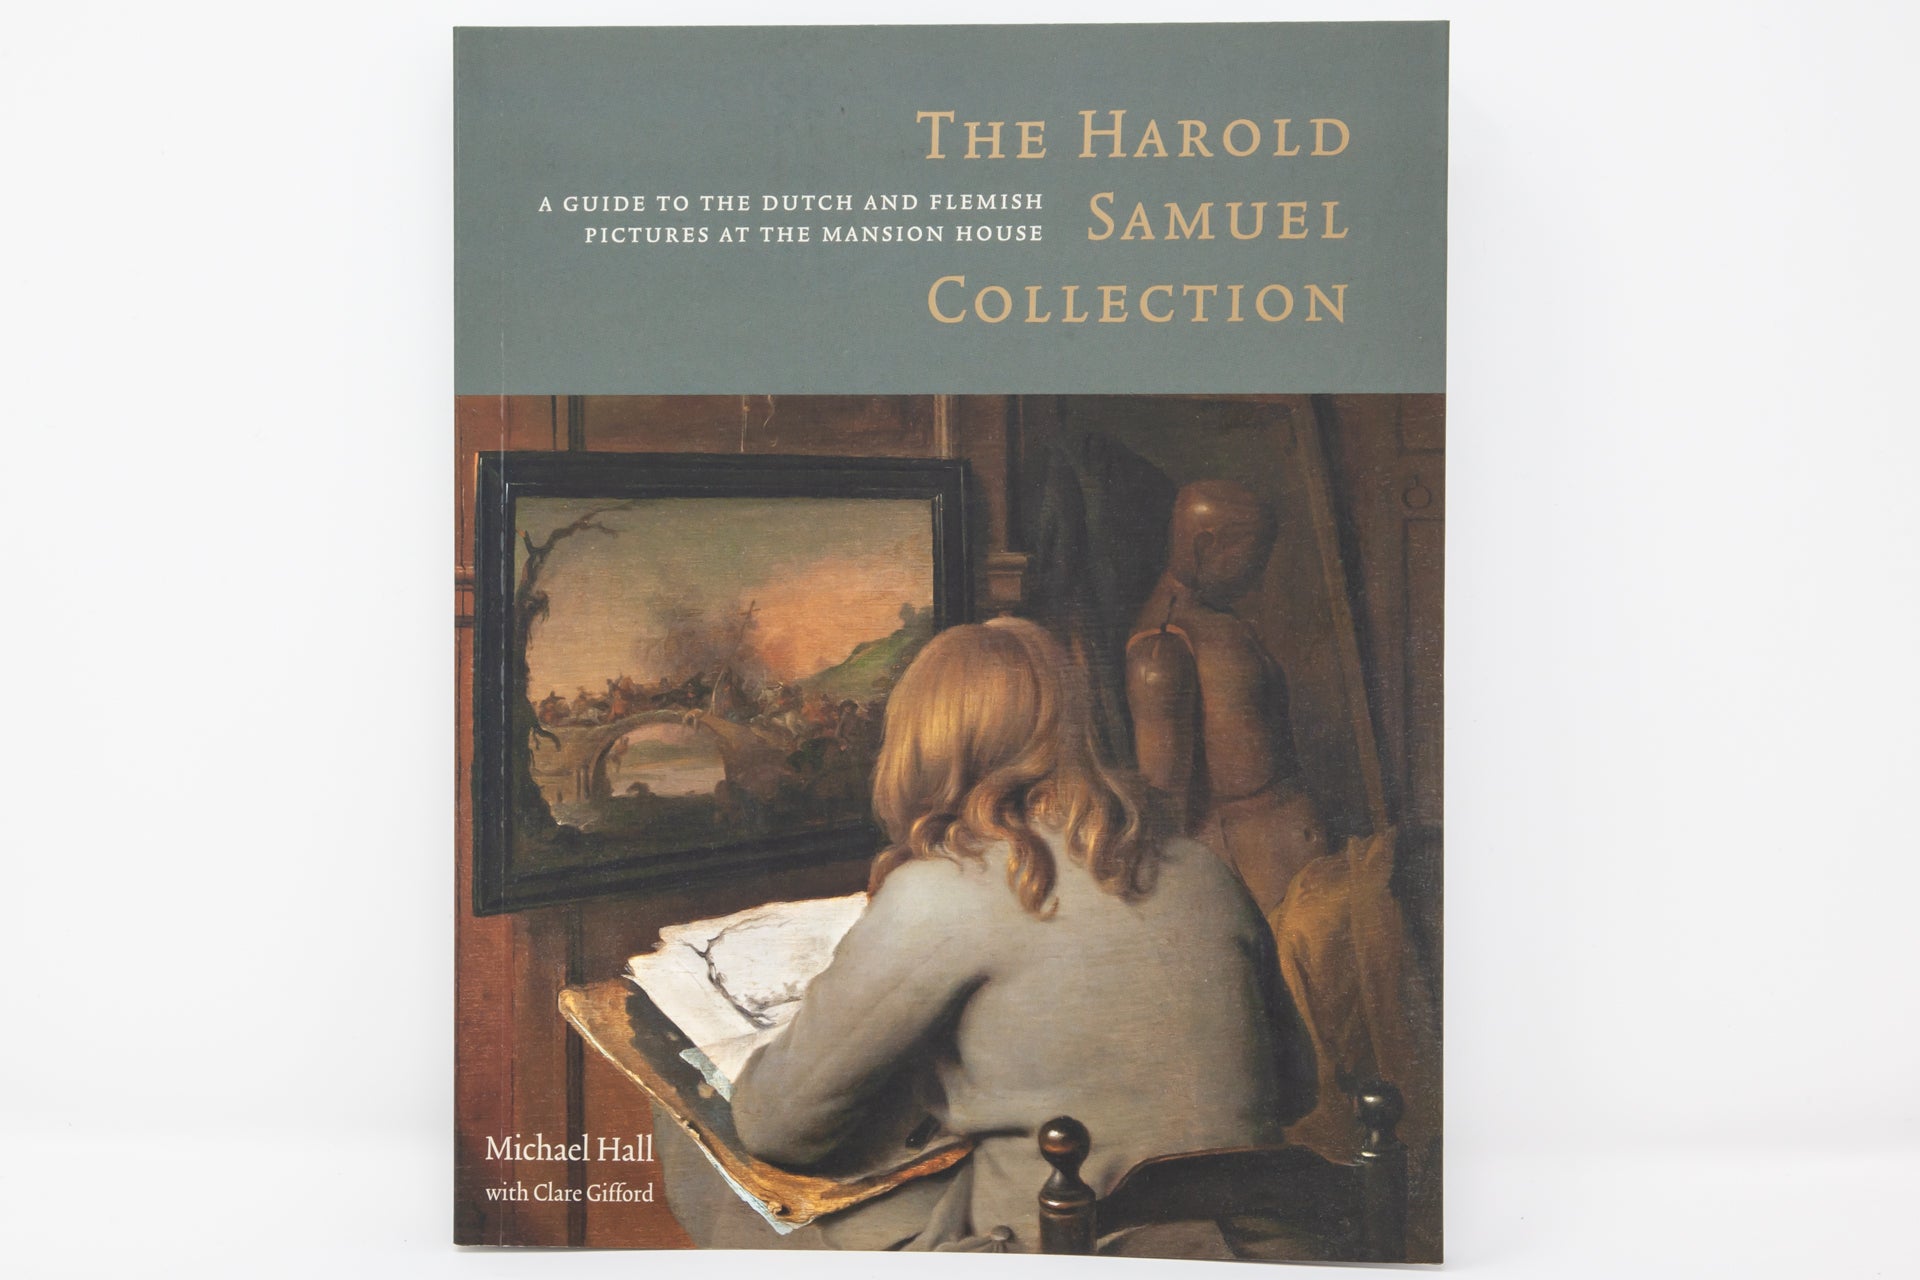 The Harold Samuel Collection: A Guide to the Dutch and Flemish Pictures at the Mansion House